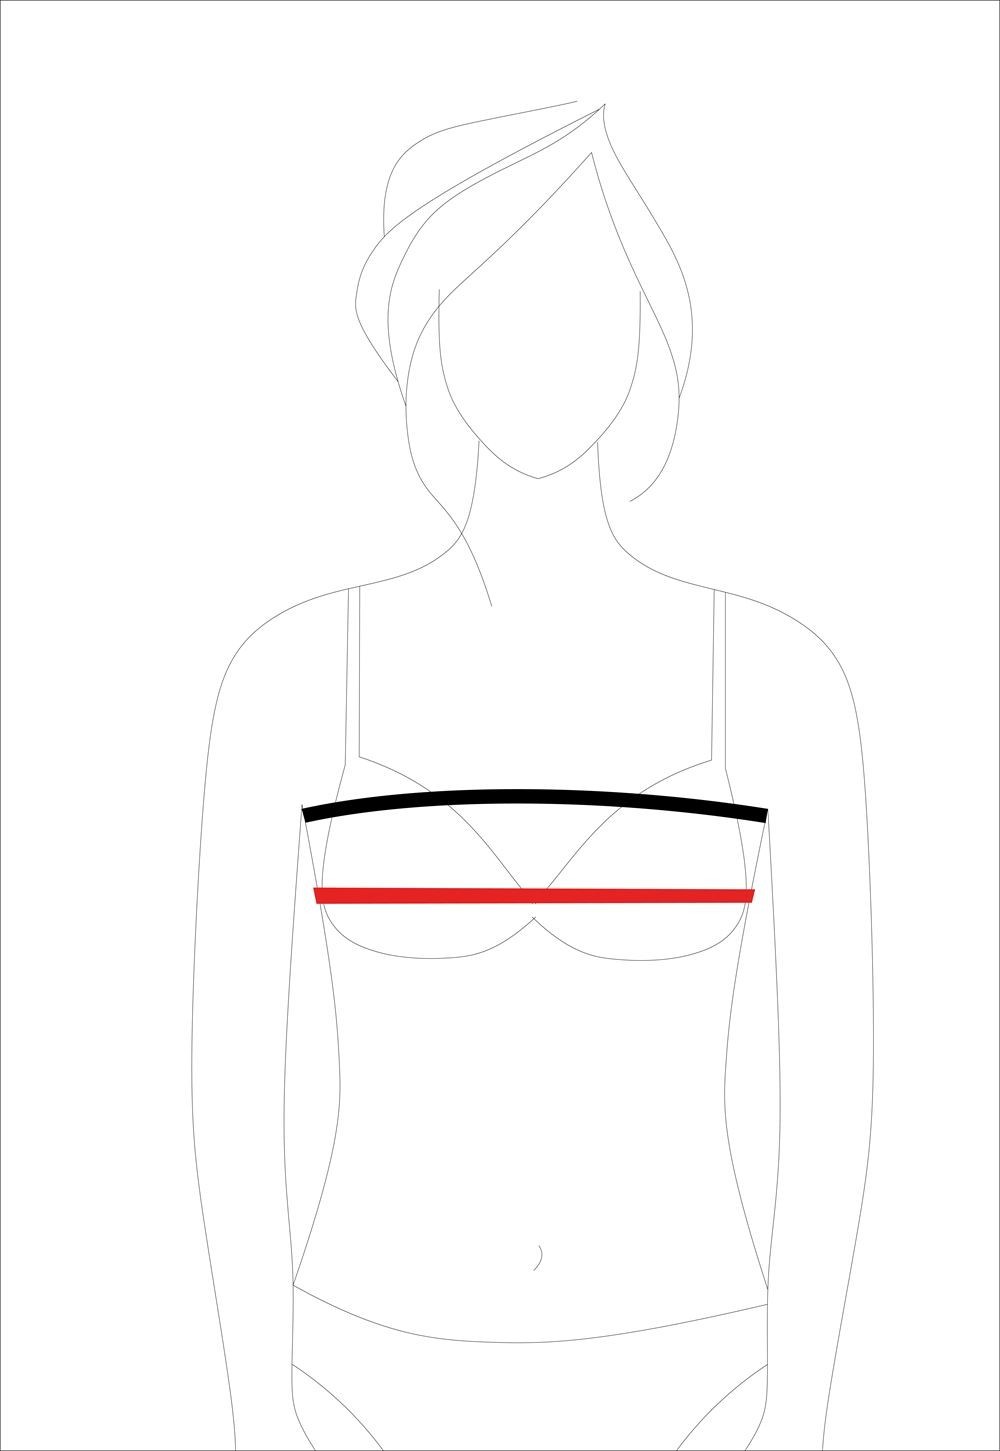 The Bust Cup Dilemma in pattern drafting - Article 1 - Ready To Sew